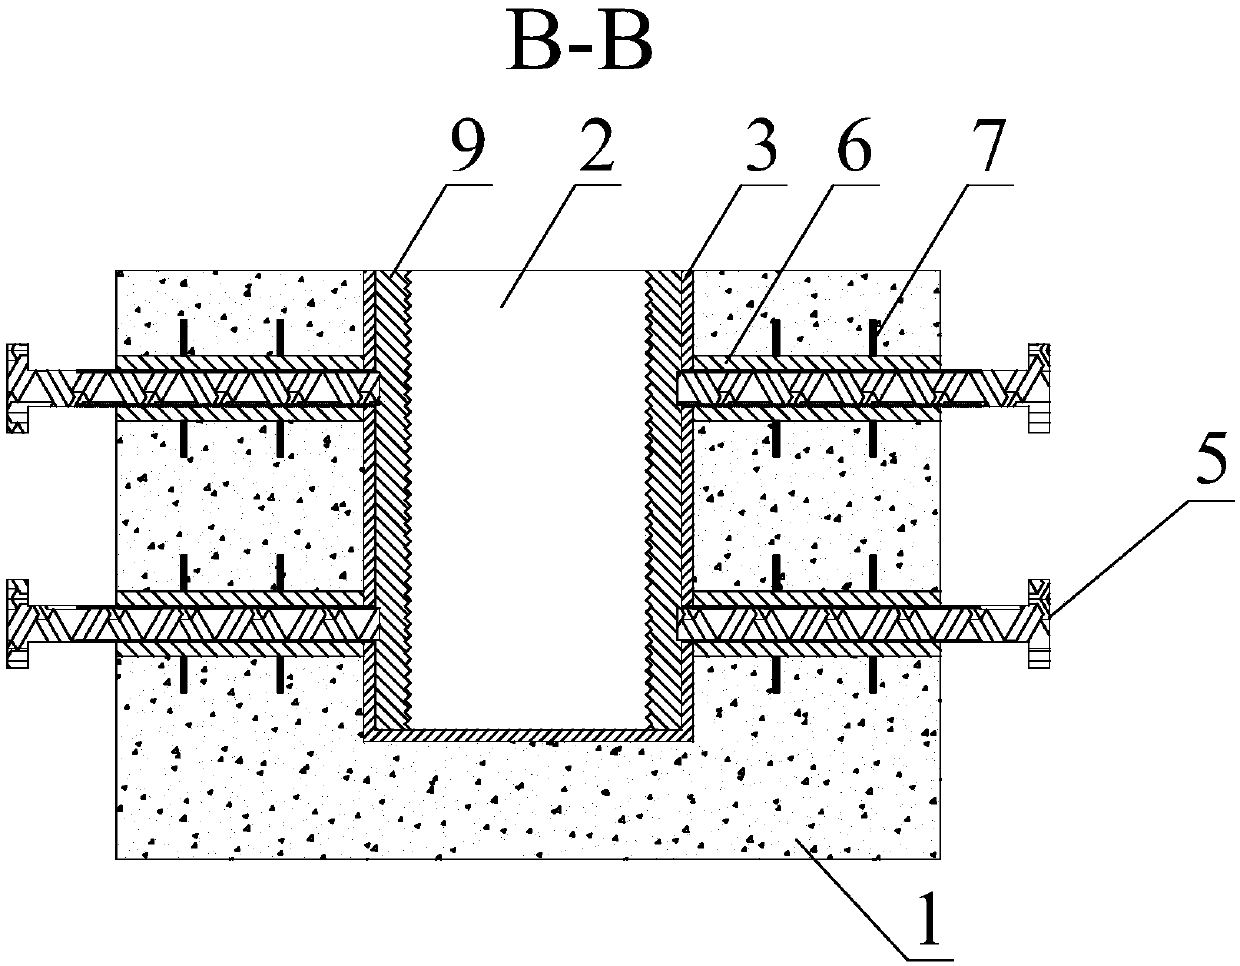 Reusable wall low-cycle repeated loading test foundation